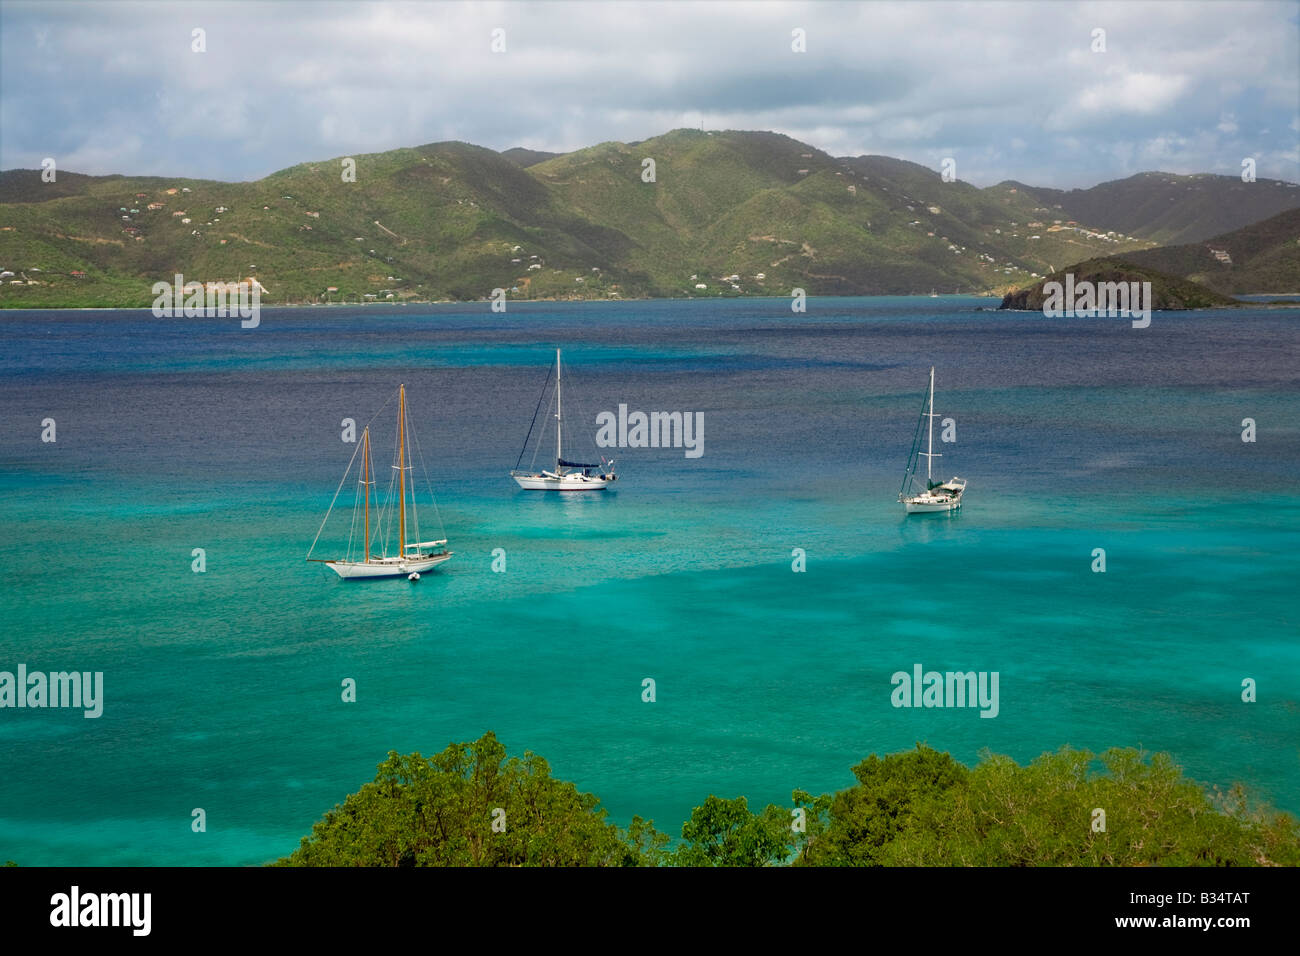 British Virgin Islands across the Sir Francis Drake Channel from St John in the US Virgin Islands Stock Photo